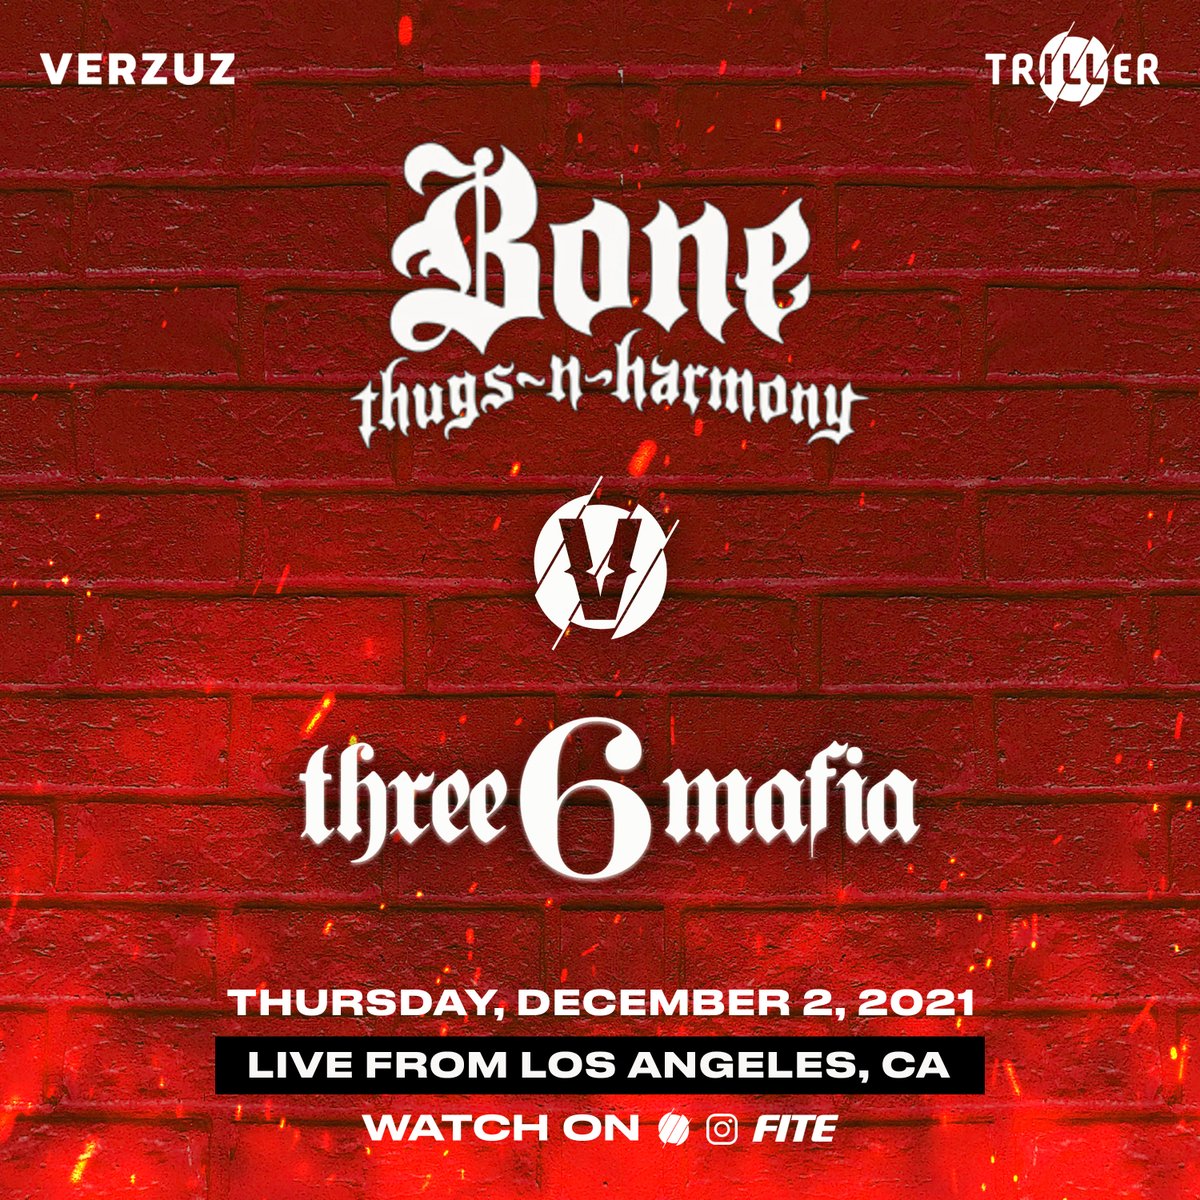 IT’S THAT TIME 🔥🔥🔥🔥 Bone Thugs-N-Harmony vs Three 6 Mafia LIVE from Los Angeles!!

Thursday, DECEMBER 2ND
MORE DETAILS COMING SOON!
#VERZUZ